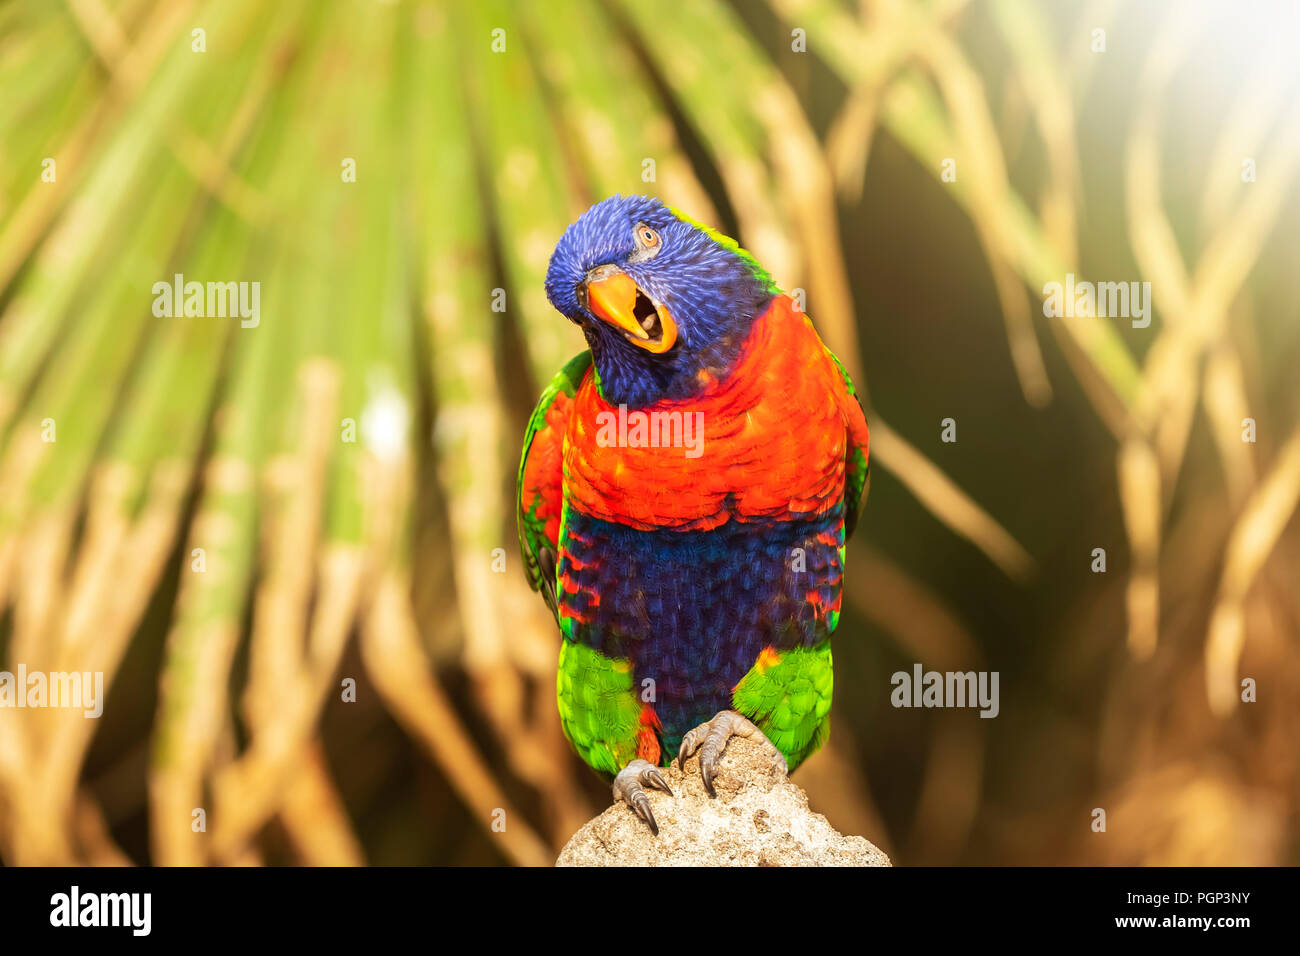 Closeup of a perched rainbow lorikeet (Trichoglossus moluccanus) or rainbow lory parrot. A vibrant colored bird native to Australia. Stock Photo